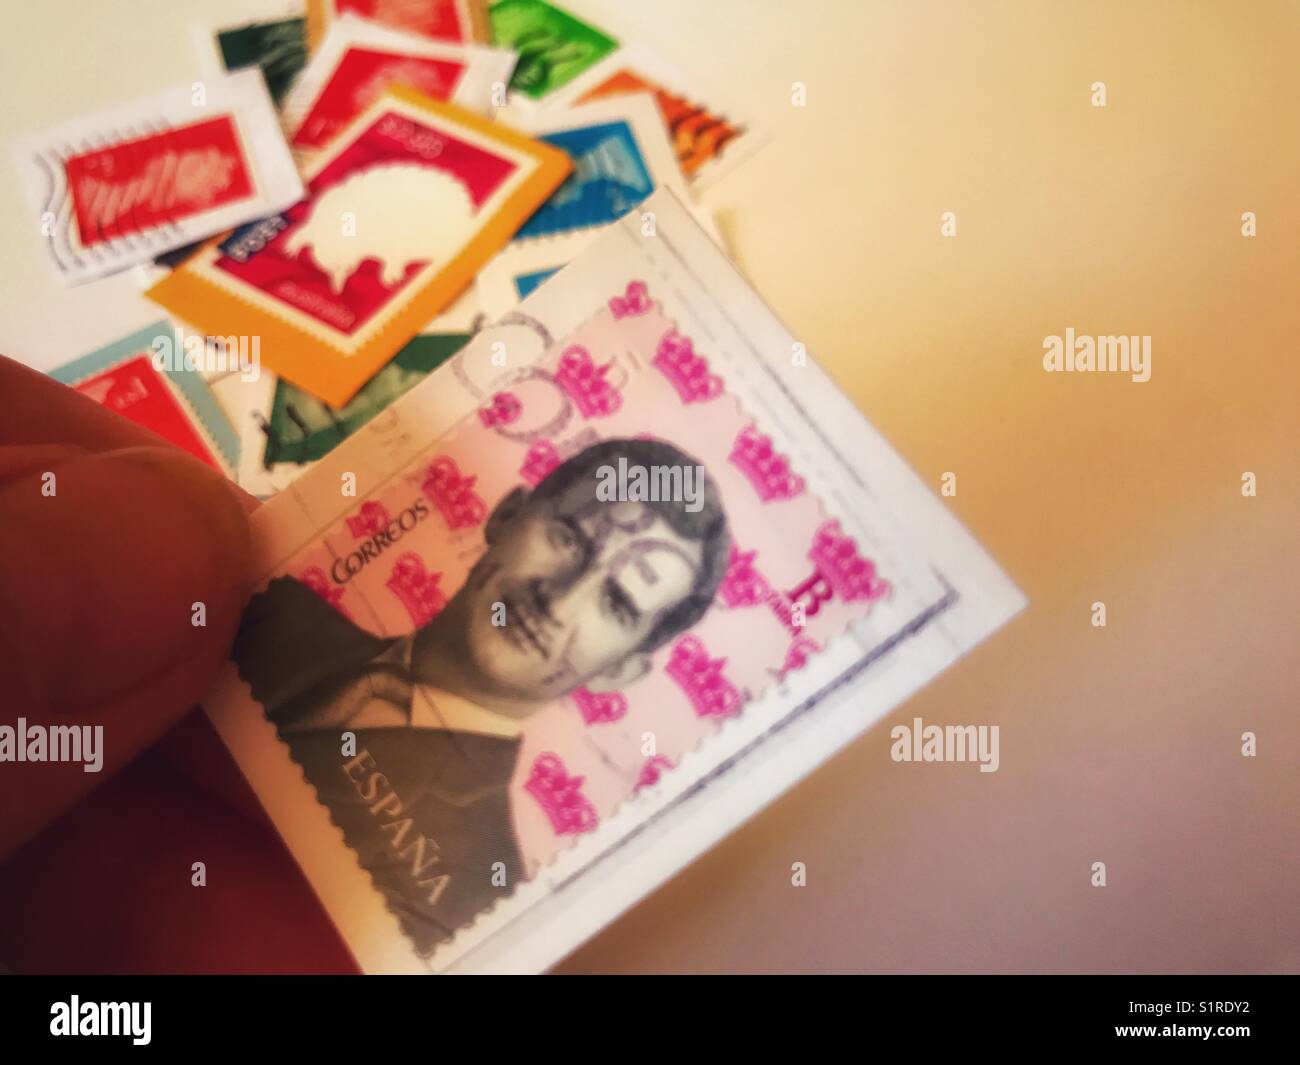 Hobbies, stamp collecting Stock Photo